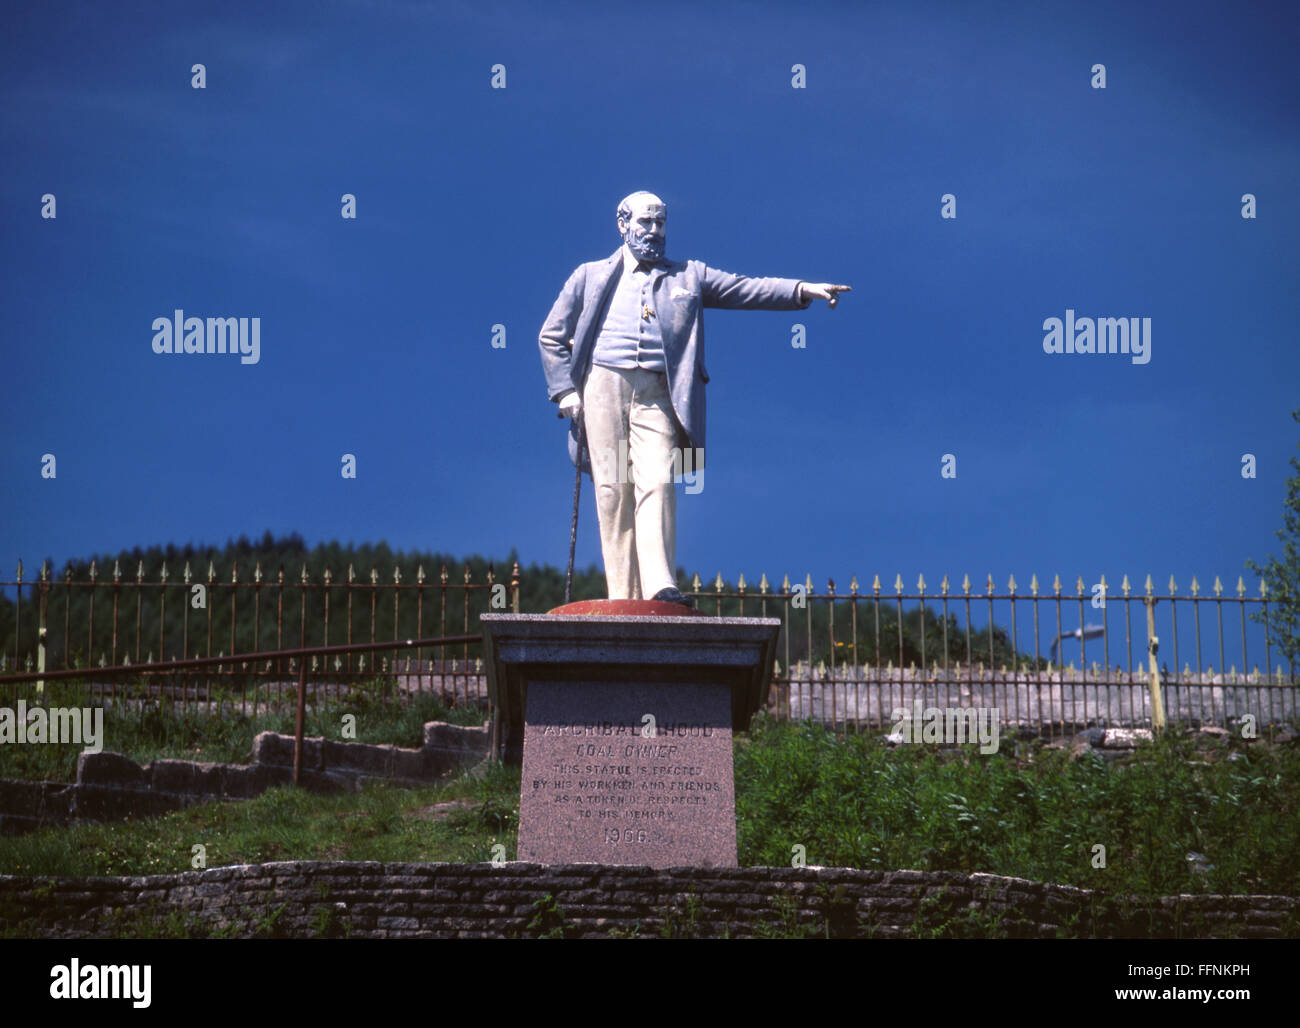 Statue of Archibald Hood coal mine owner and benevolent industrialist Llwynypia Rhondda Cynon Taf South Wales Valleys UK Stock Photo